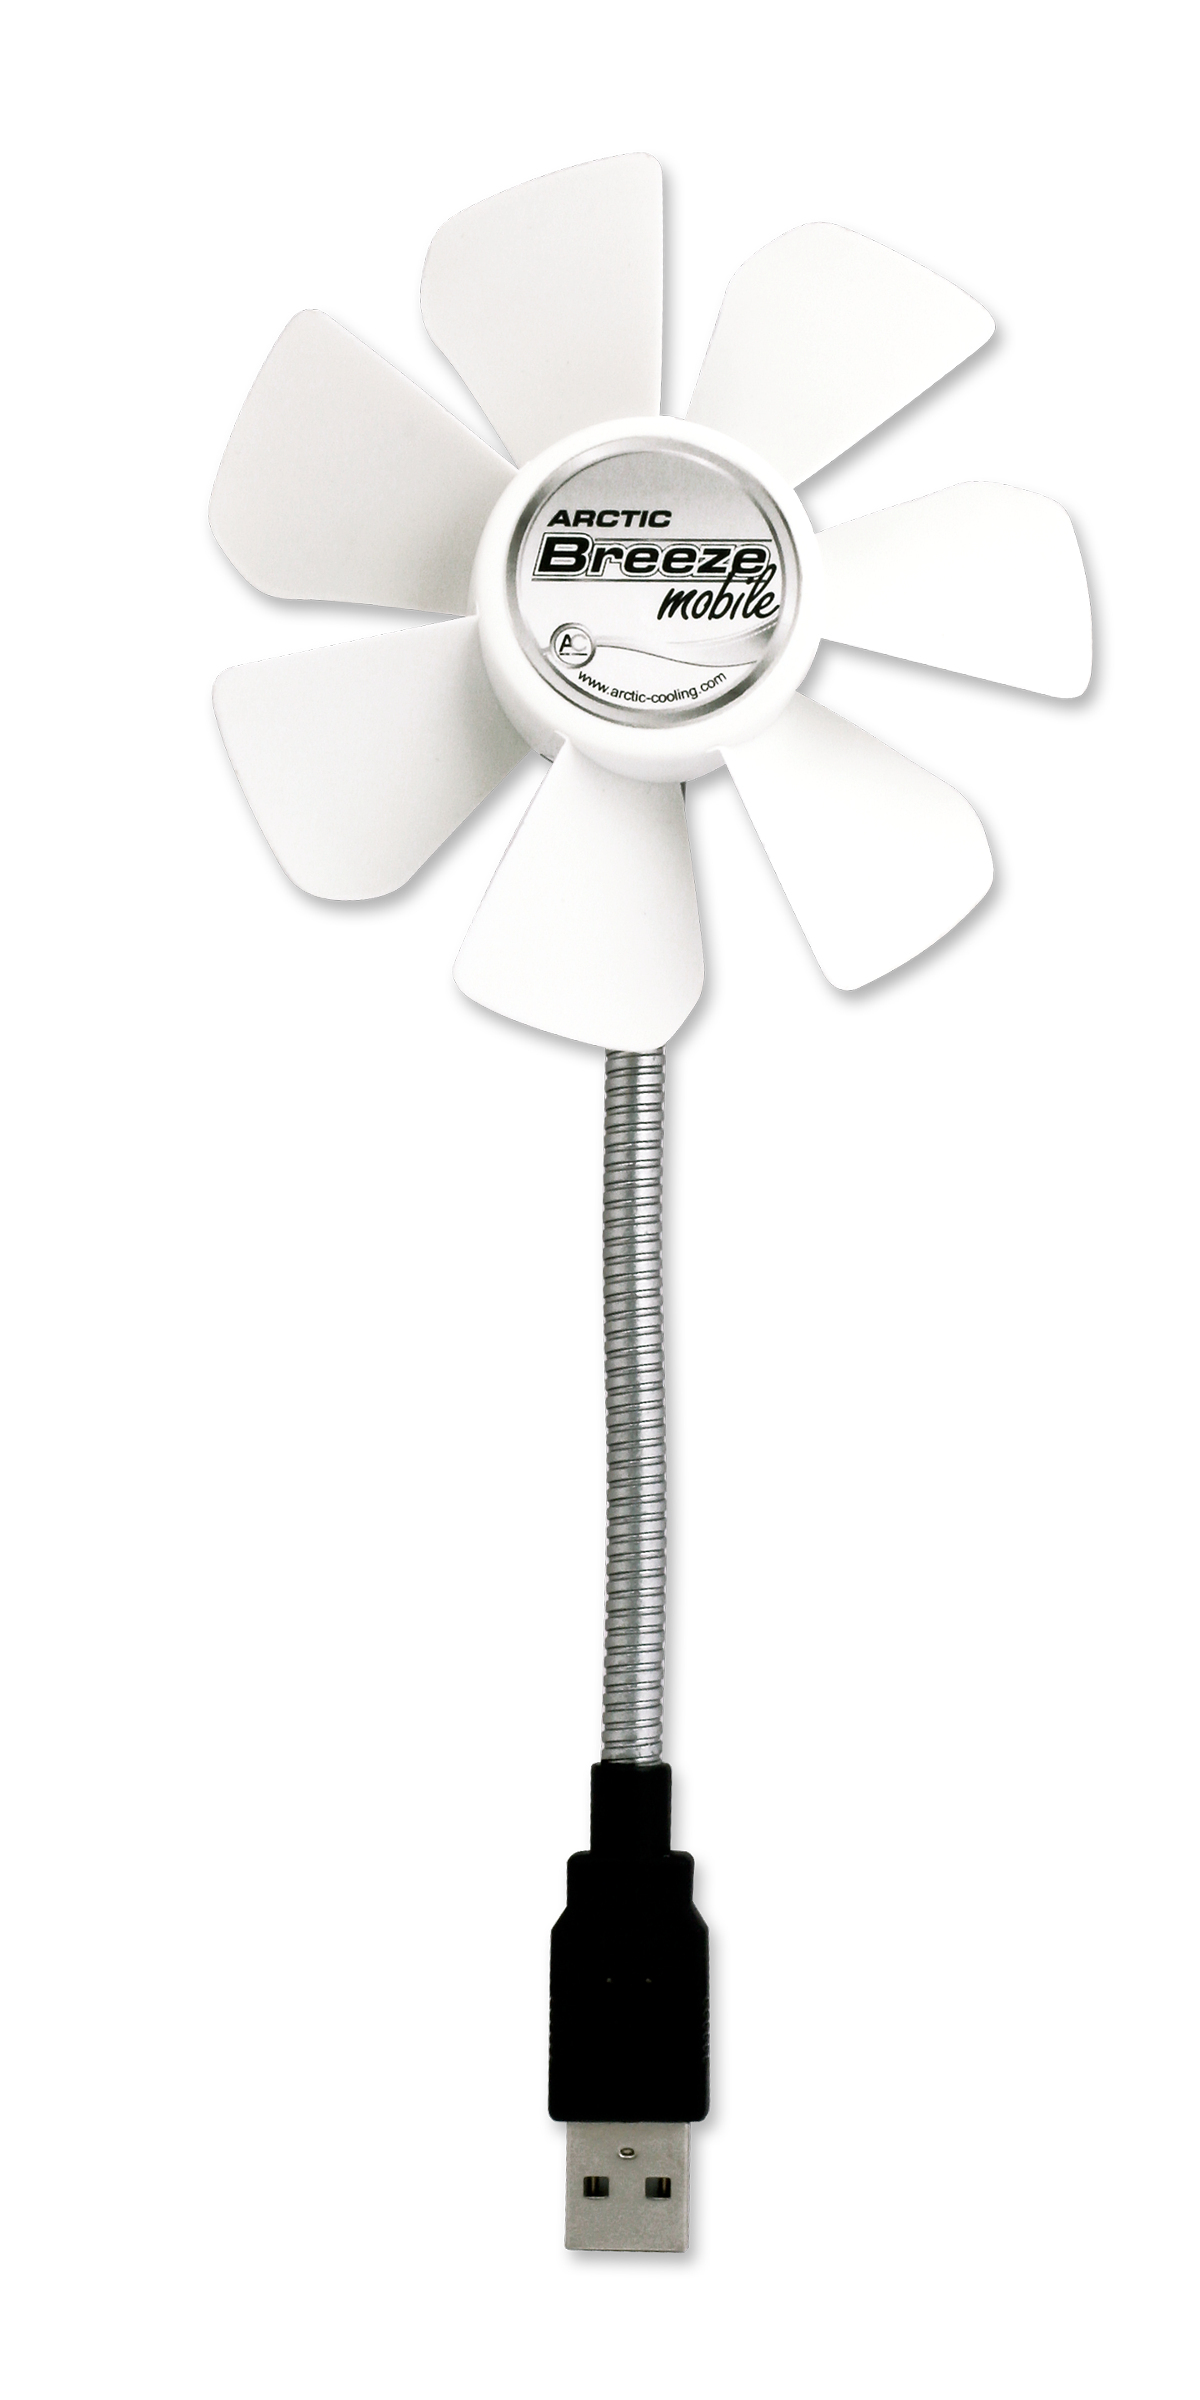 ARCTIC BREEZE MOBILE, PORTABLE USB-POWERED 92MM COOLING FAN THAT CAN BE POWERED